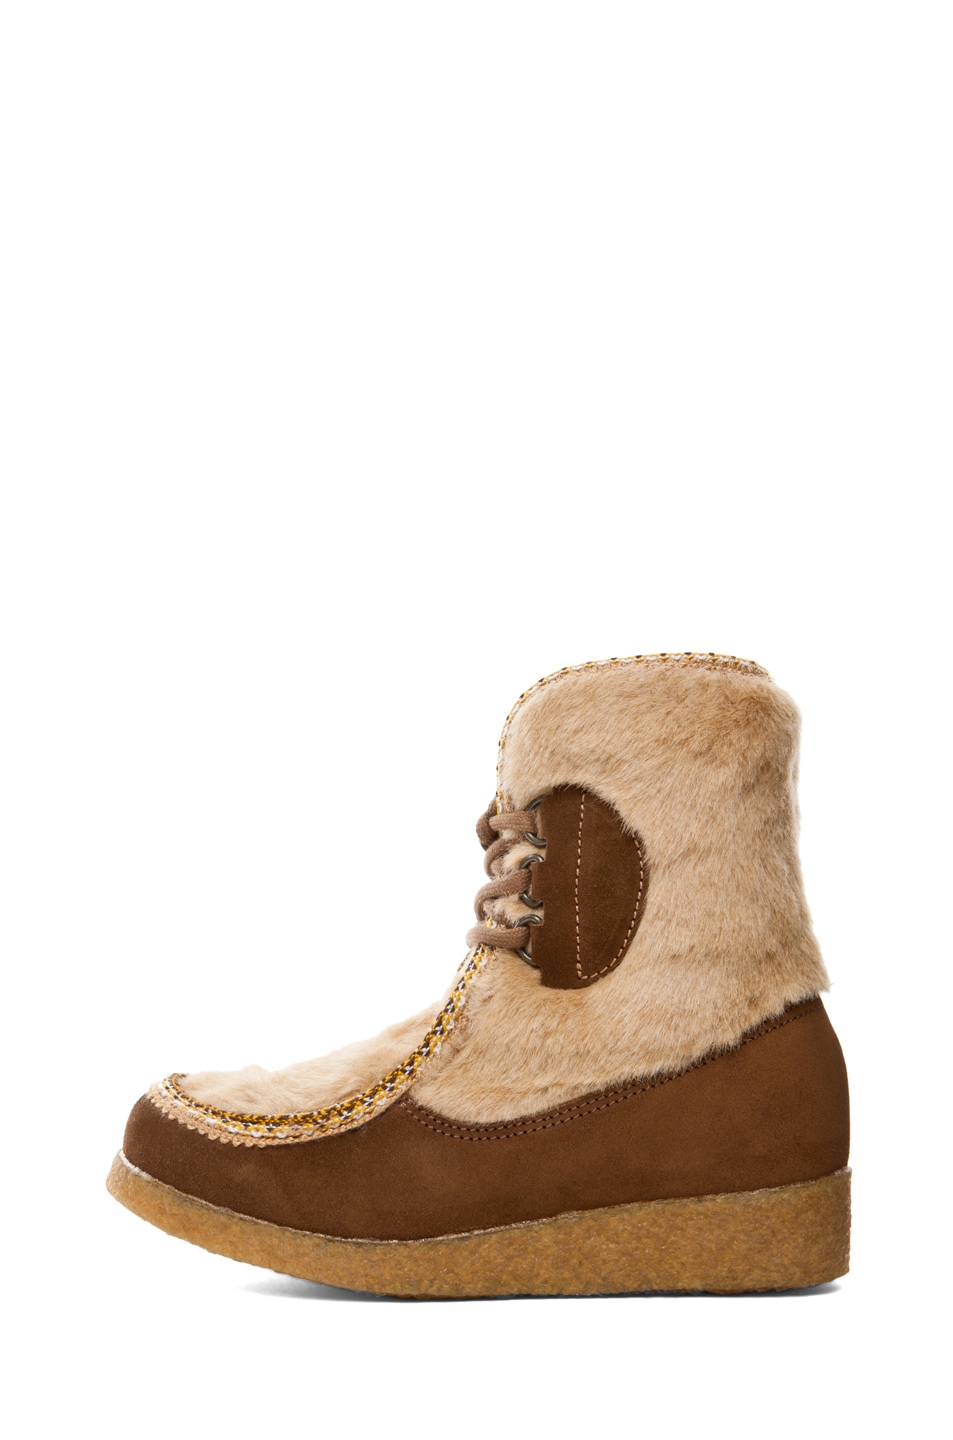 Image 1 of A.P.C. Veau Velours Moccasin Fur Boot in Noisette